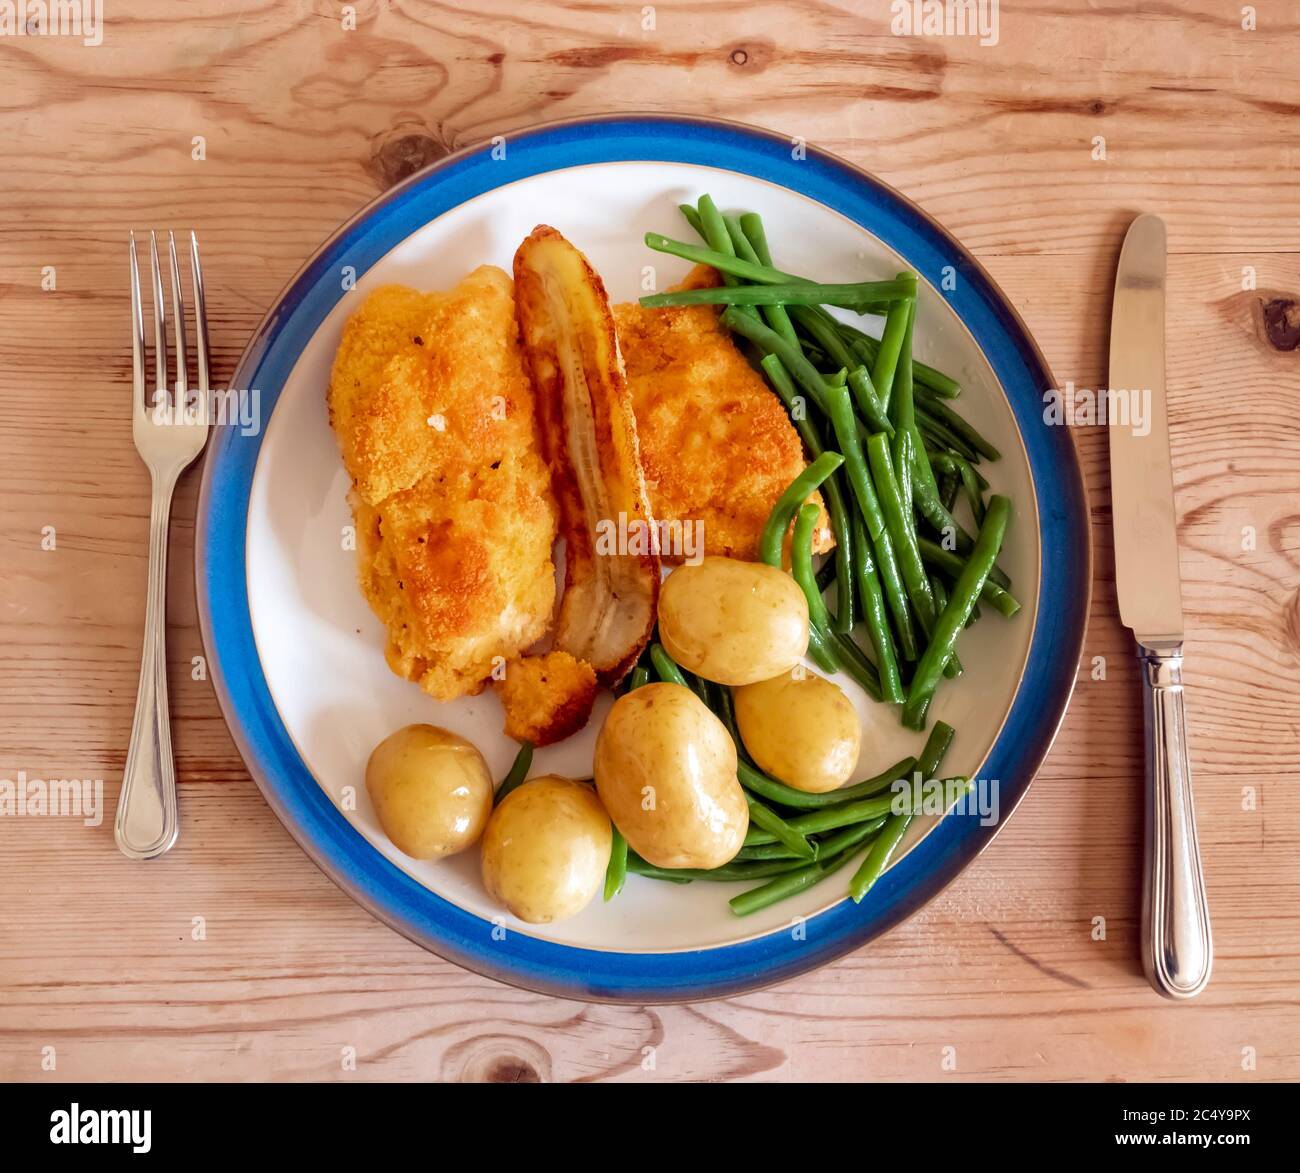 Lunch main course breaded chicken fillets with green beans new potatoes  and a fried banana white plate blue edge wooden table top with cutlery Stock Photo